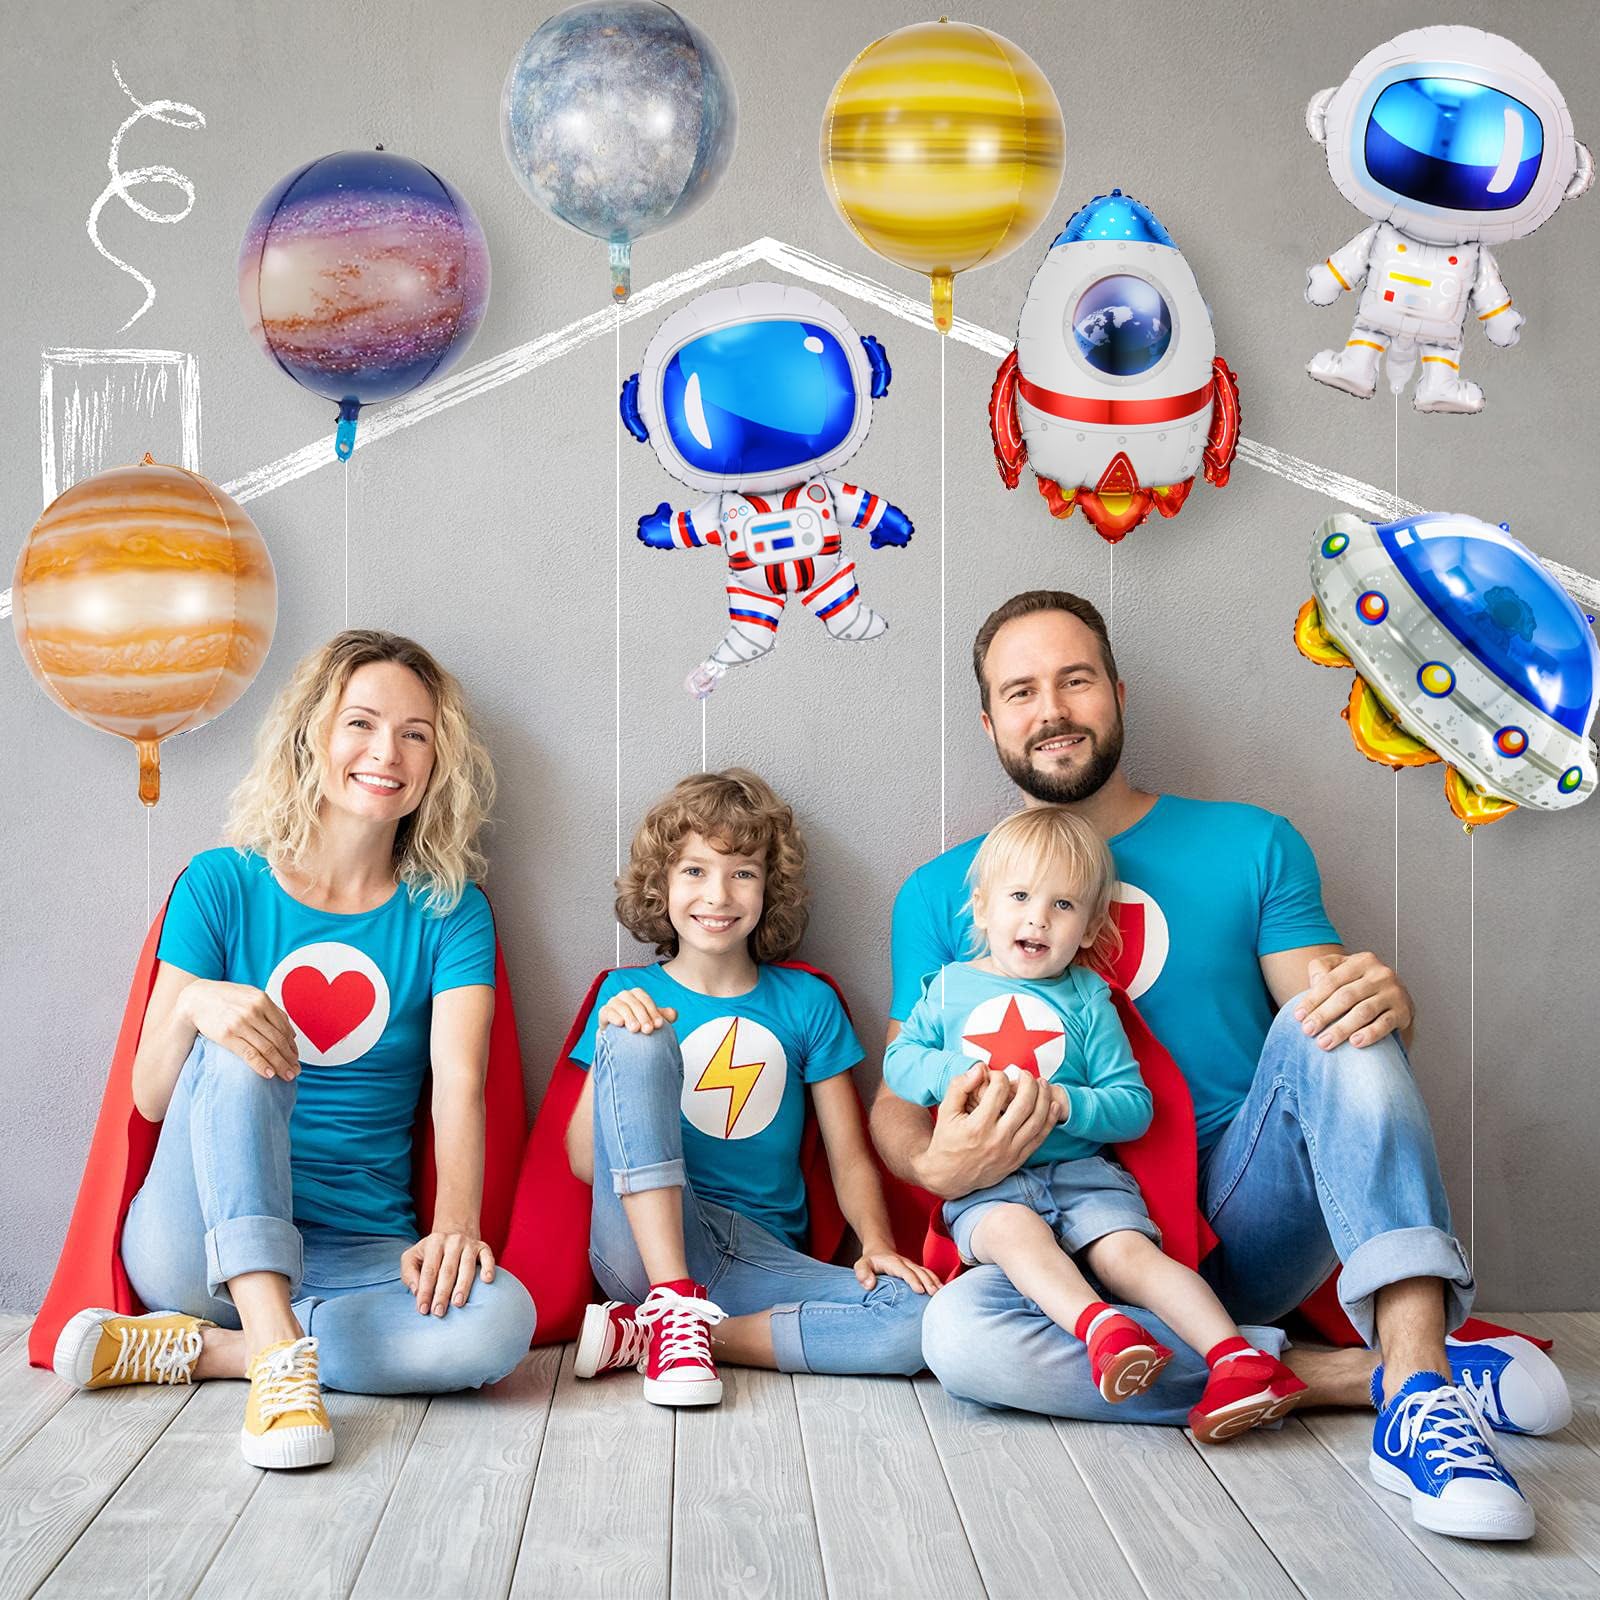 16 Pieces Galaxy Space Balloons - Large Outer Space Themed Balloon Rocket Spaceship Astronaut Galaxy Planet Inflatable Balloons for Kids Space Birthday Party Supplies Baby Shower Decorations